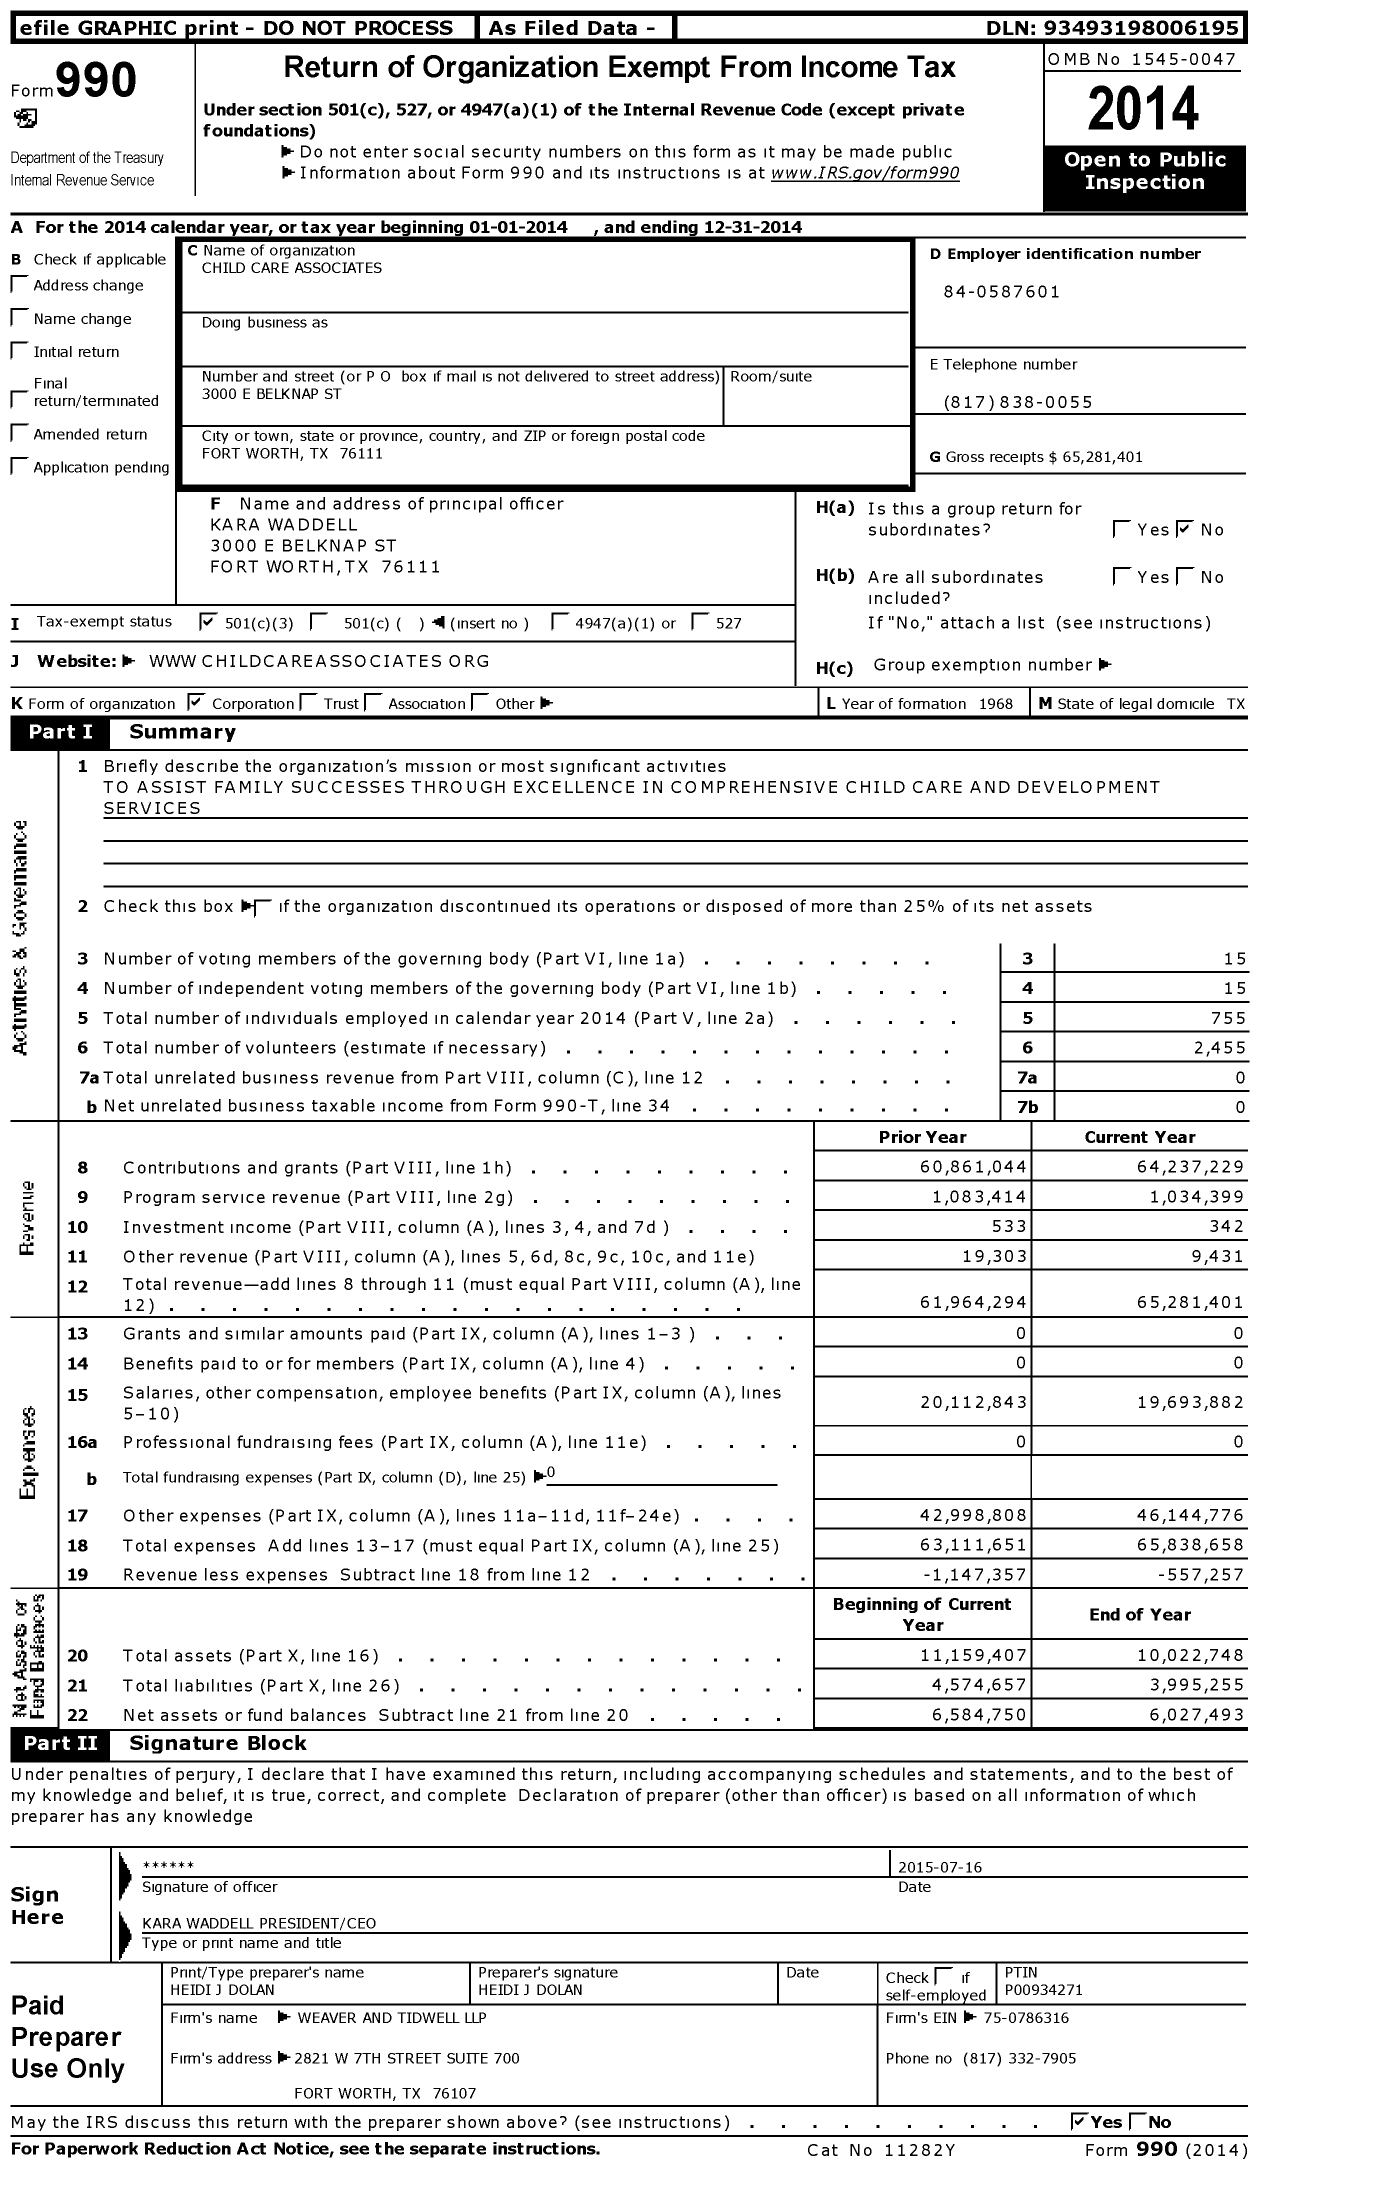 Image of first page of 2014 Form 990 for Child Care Associates (CCA)